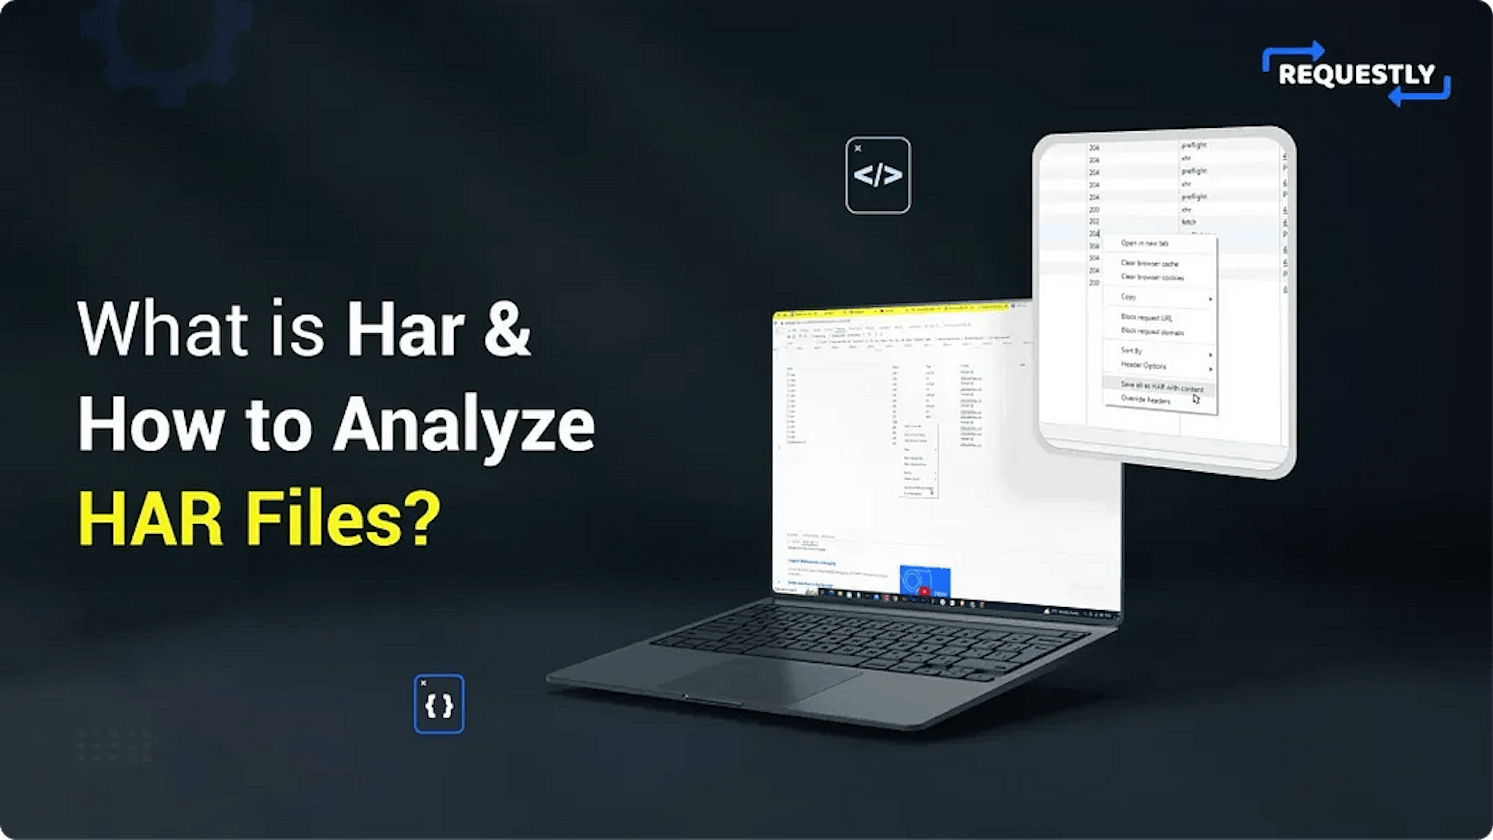 What is a HAR file and How to analyze them?